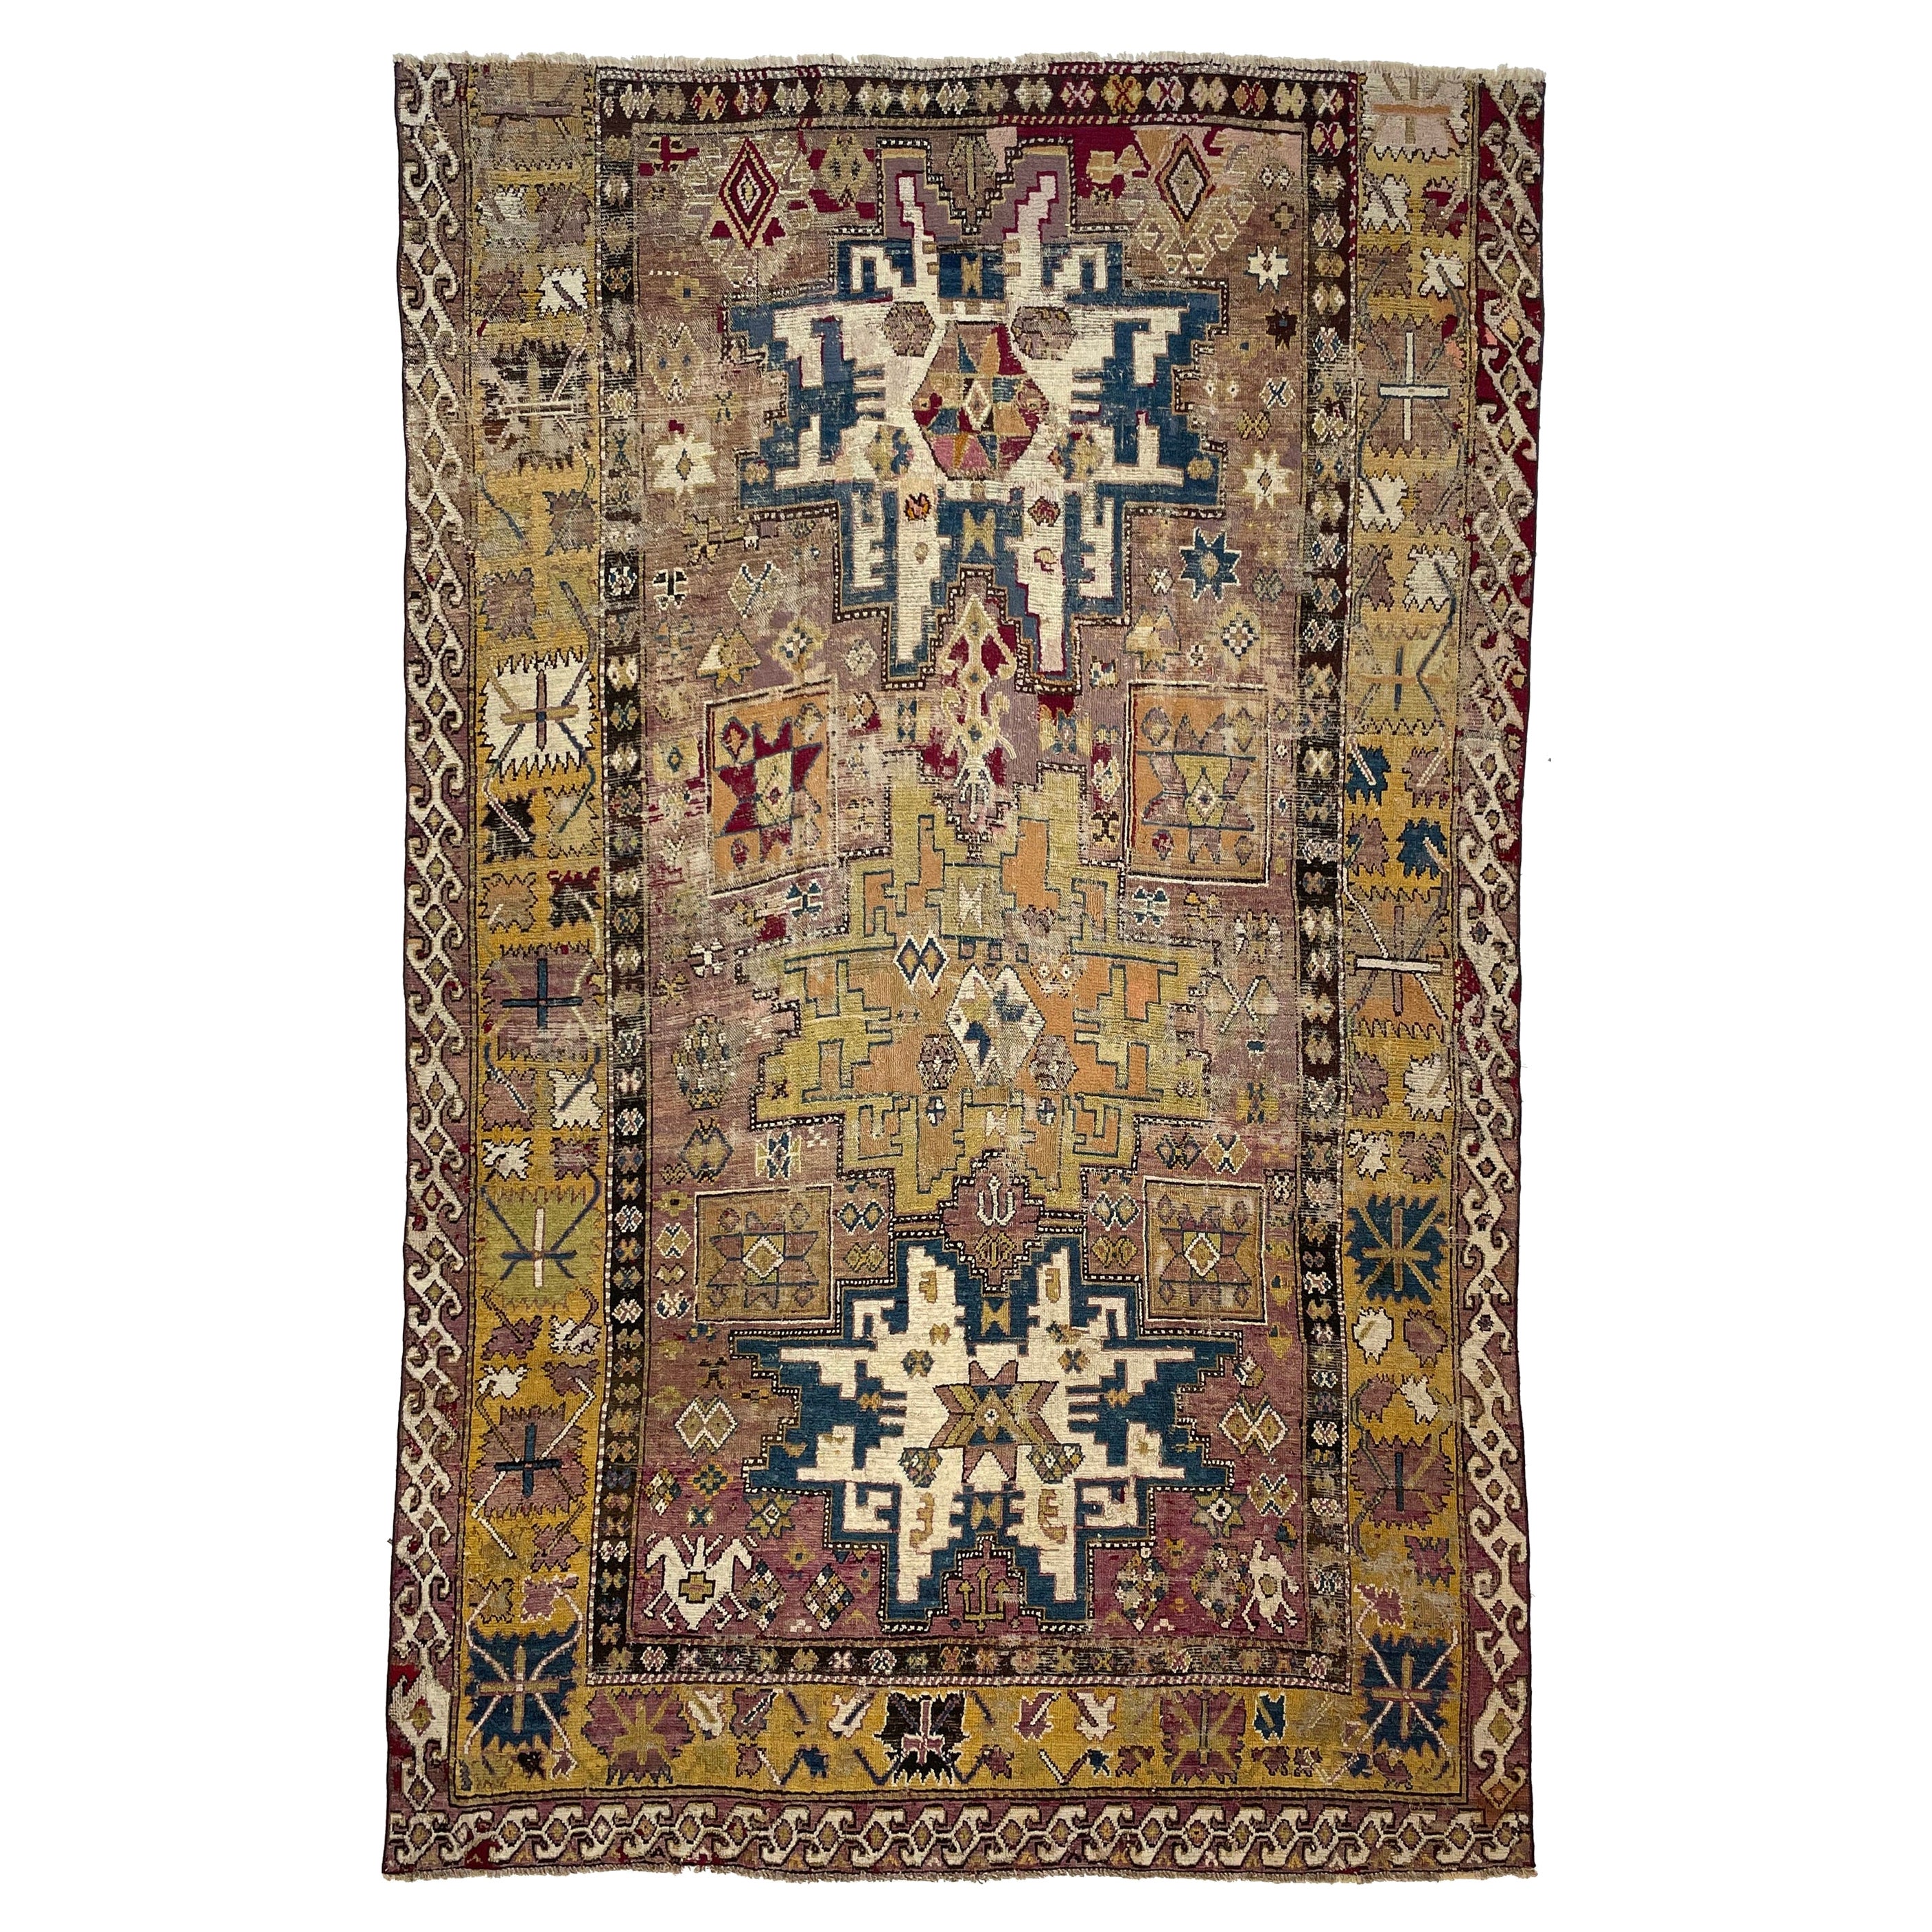 Antique Textile Rug with Lavender, Sunflower Yellows, & Blues, c. 1900 For Sale